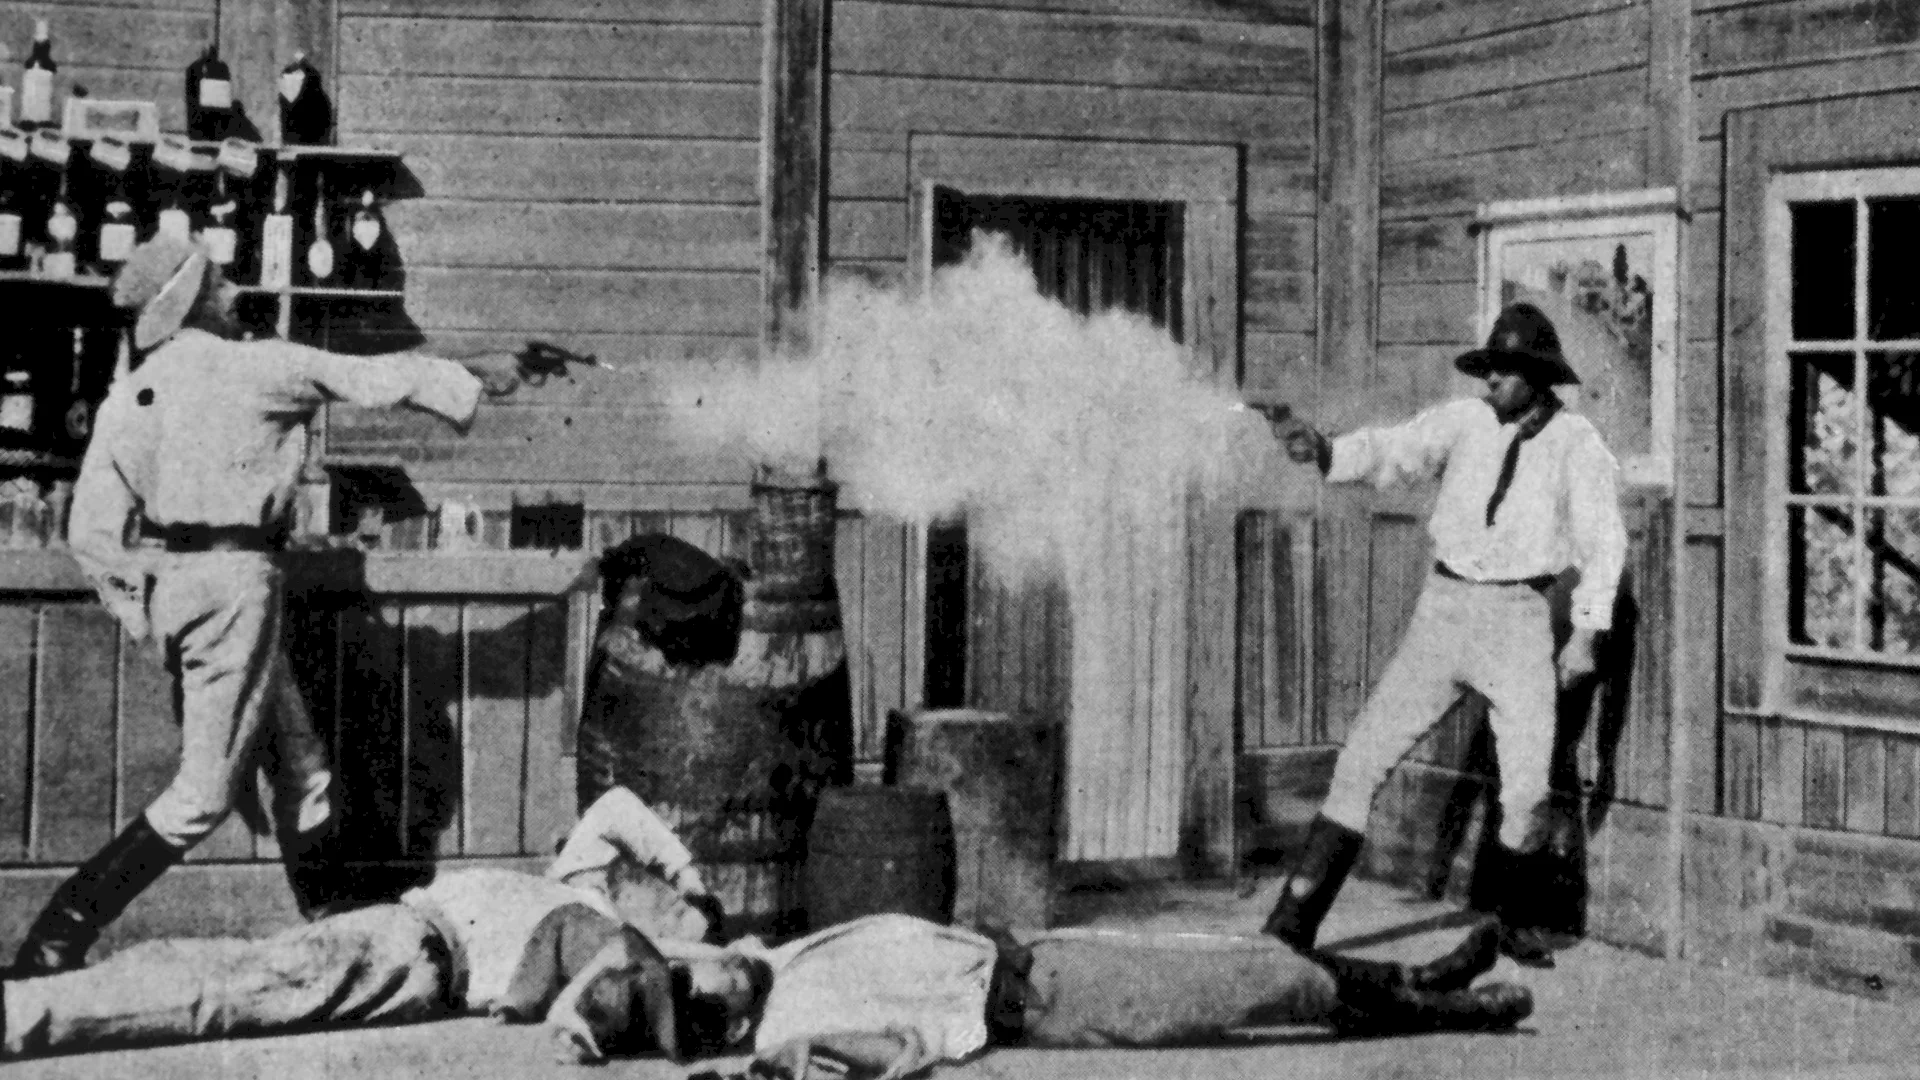 Photo du film : The story of the kelly gang